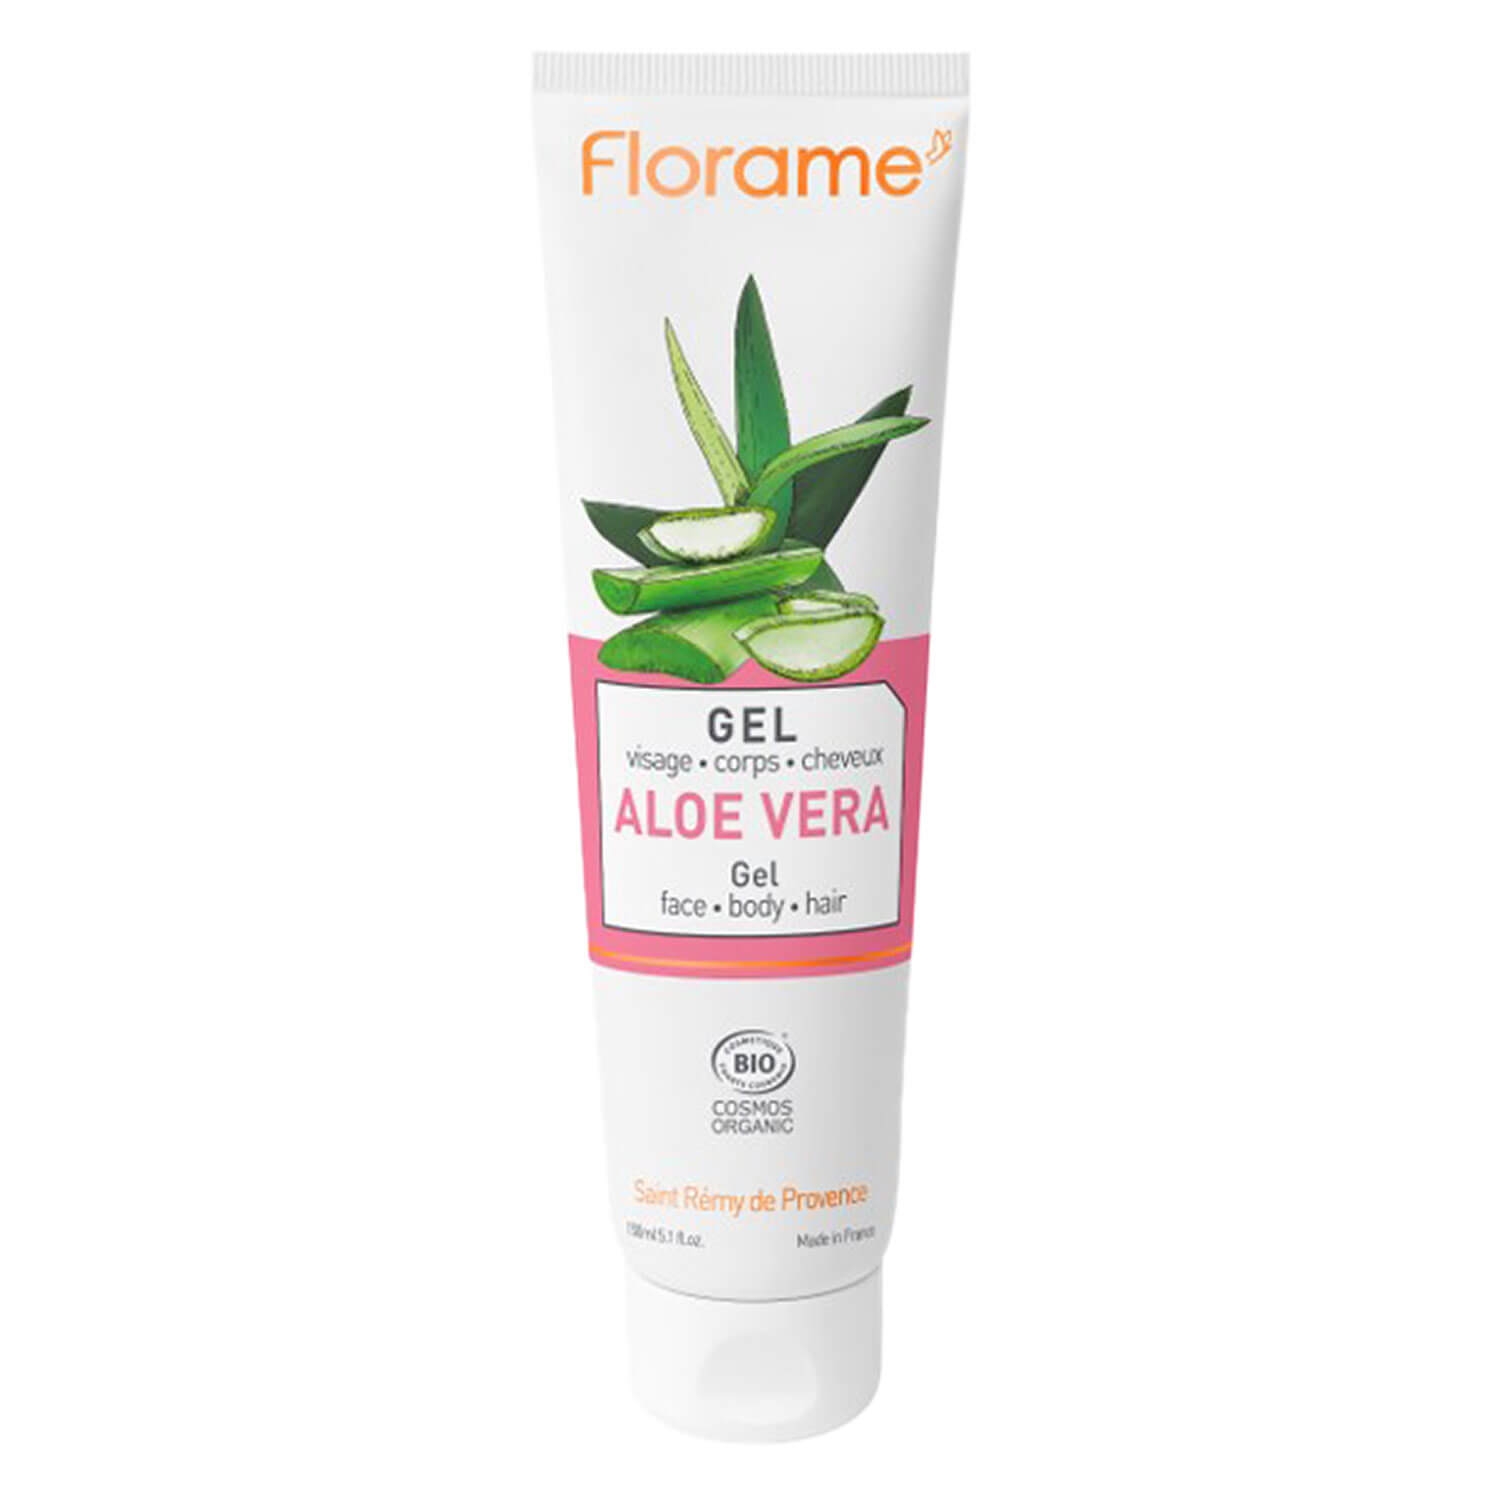 Product image from Florame - Aloe Vera Gel